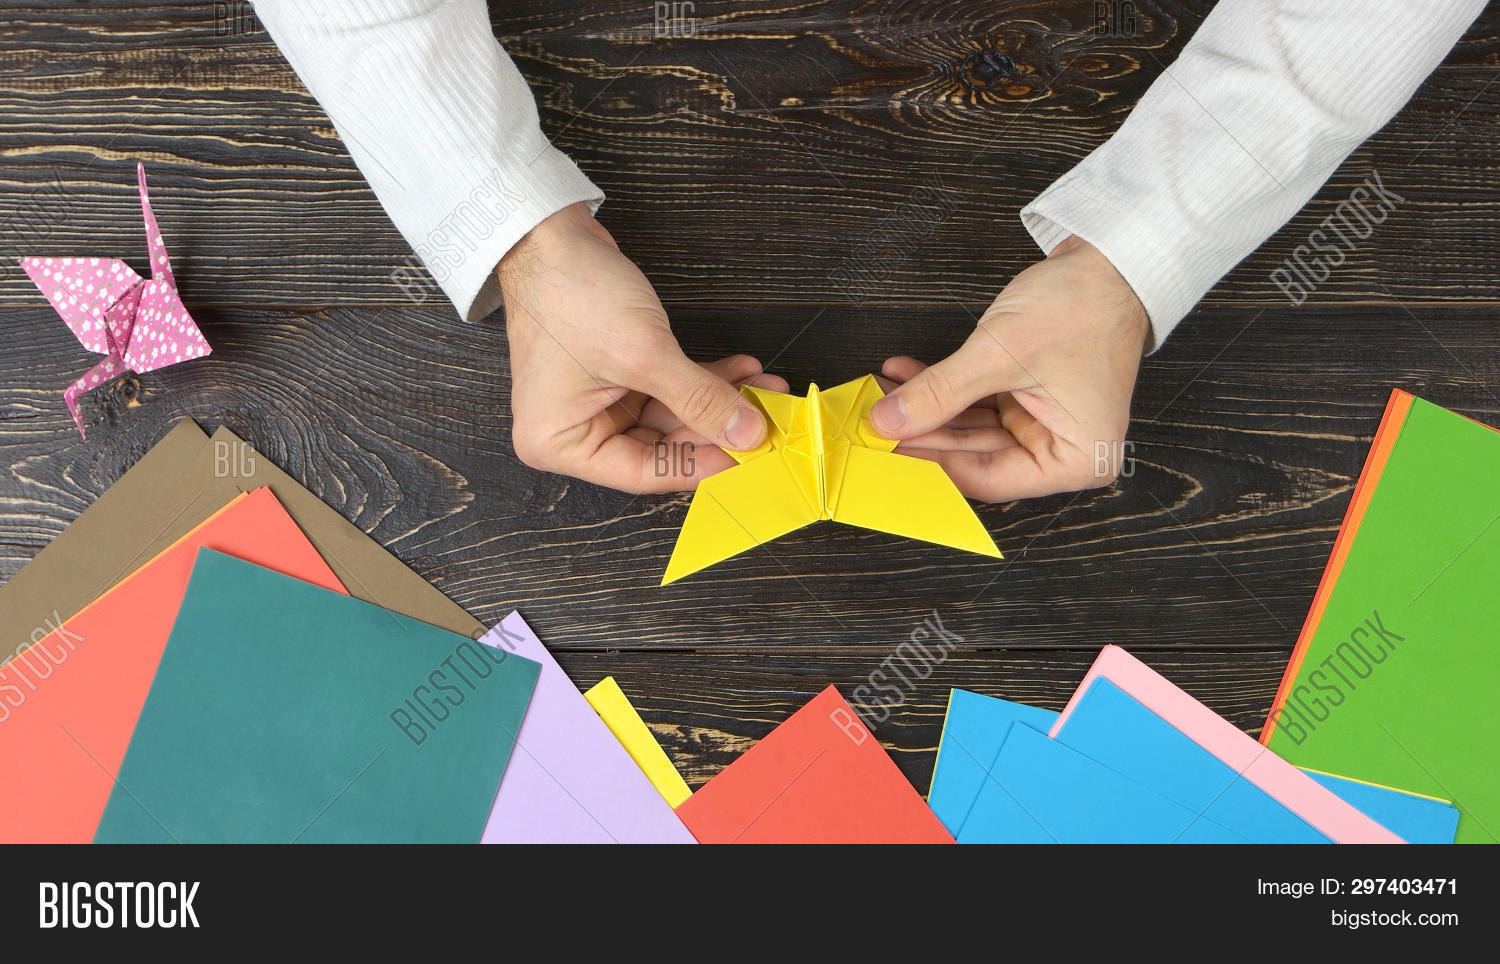 Make Easy Origami Butterfly Man Made Origami Image Photo Free Trial Bigstock